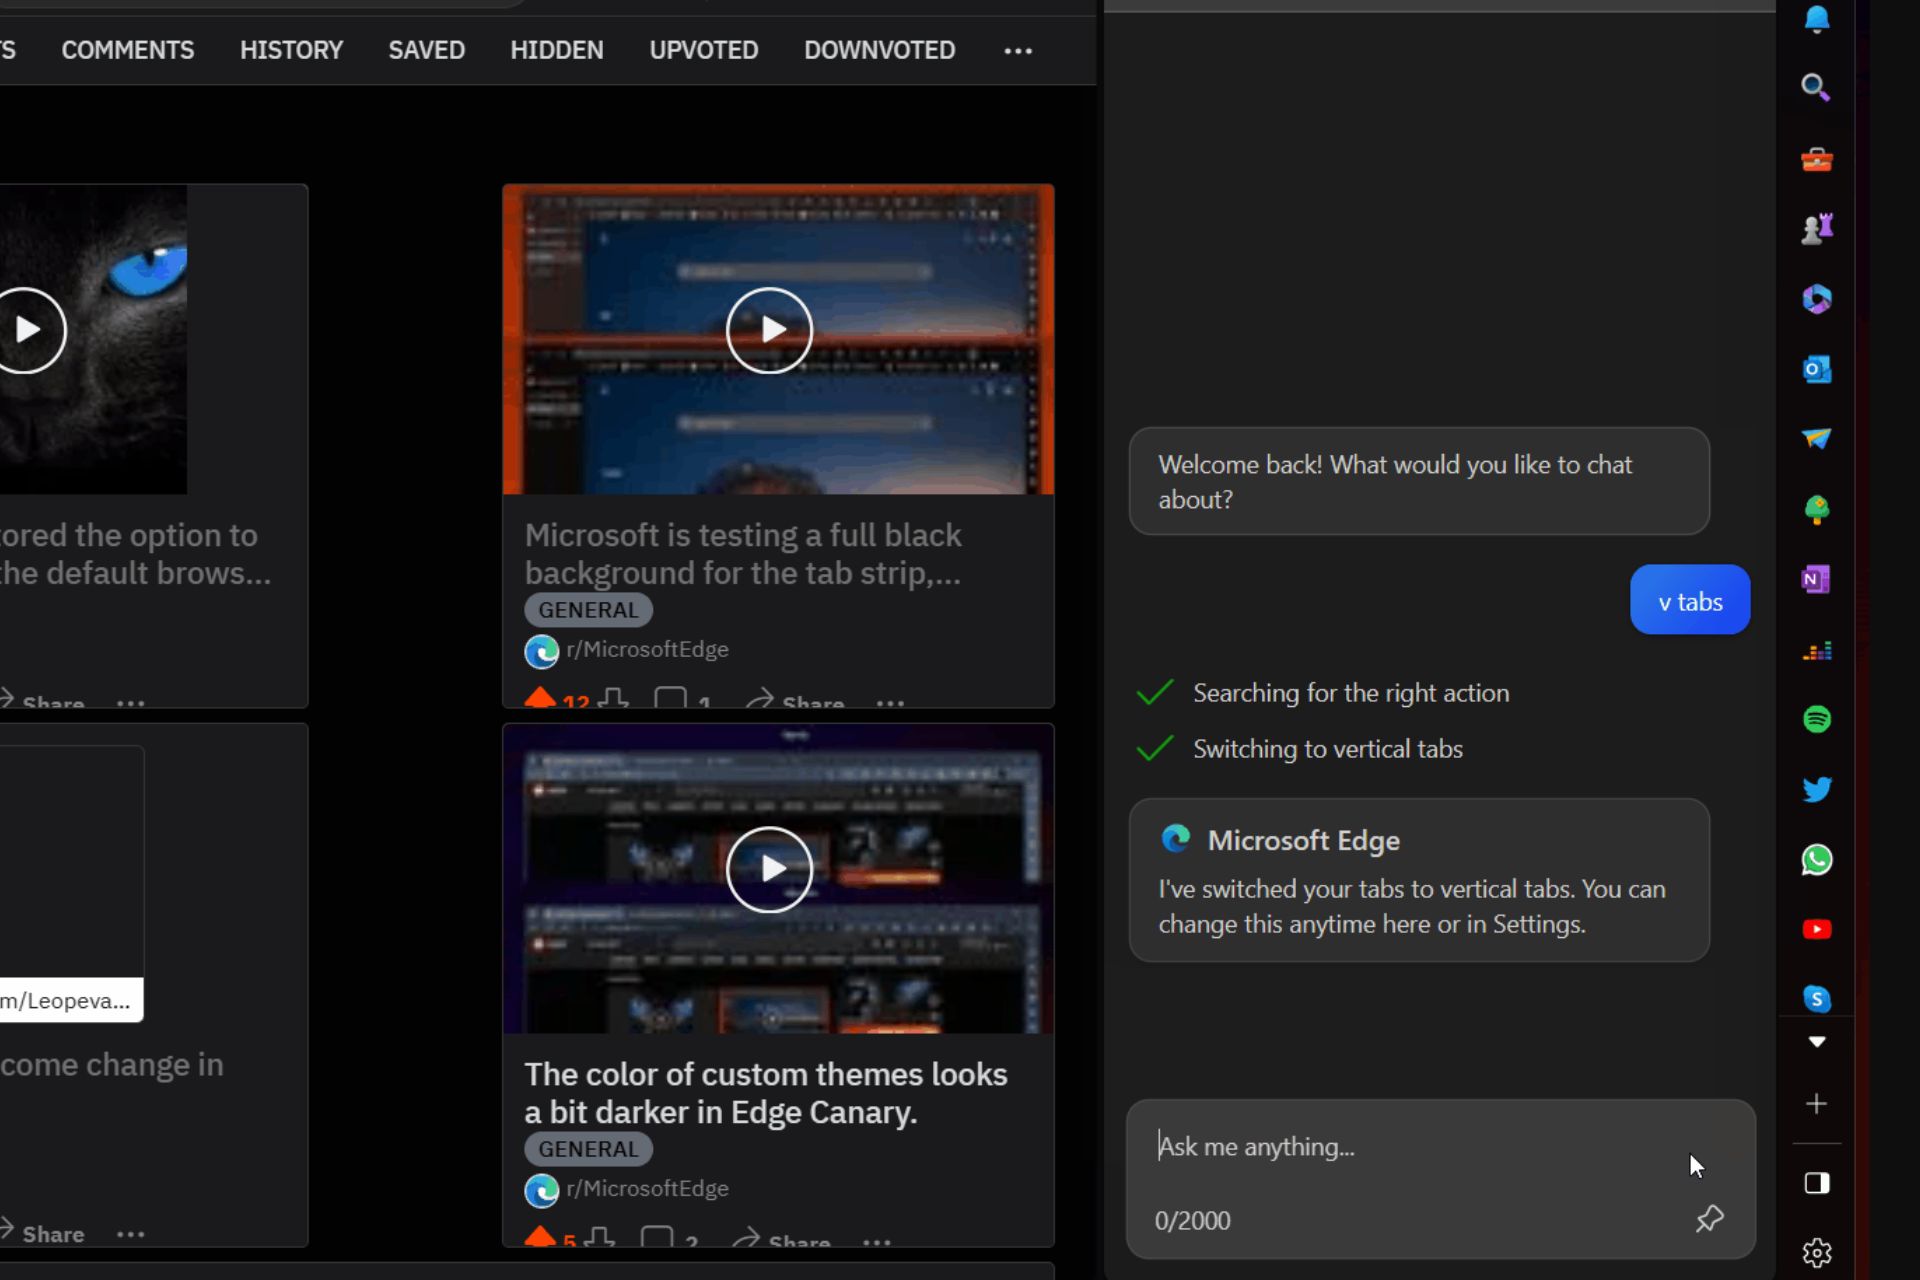 control microsoft edge from bing chat